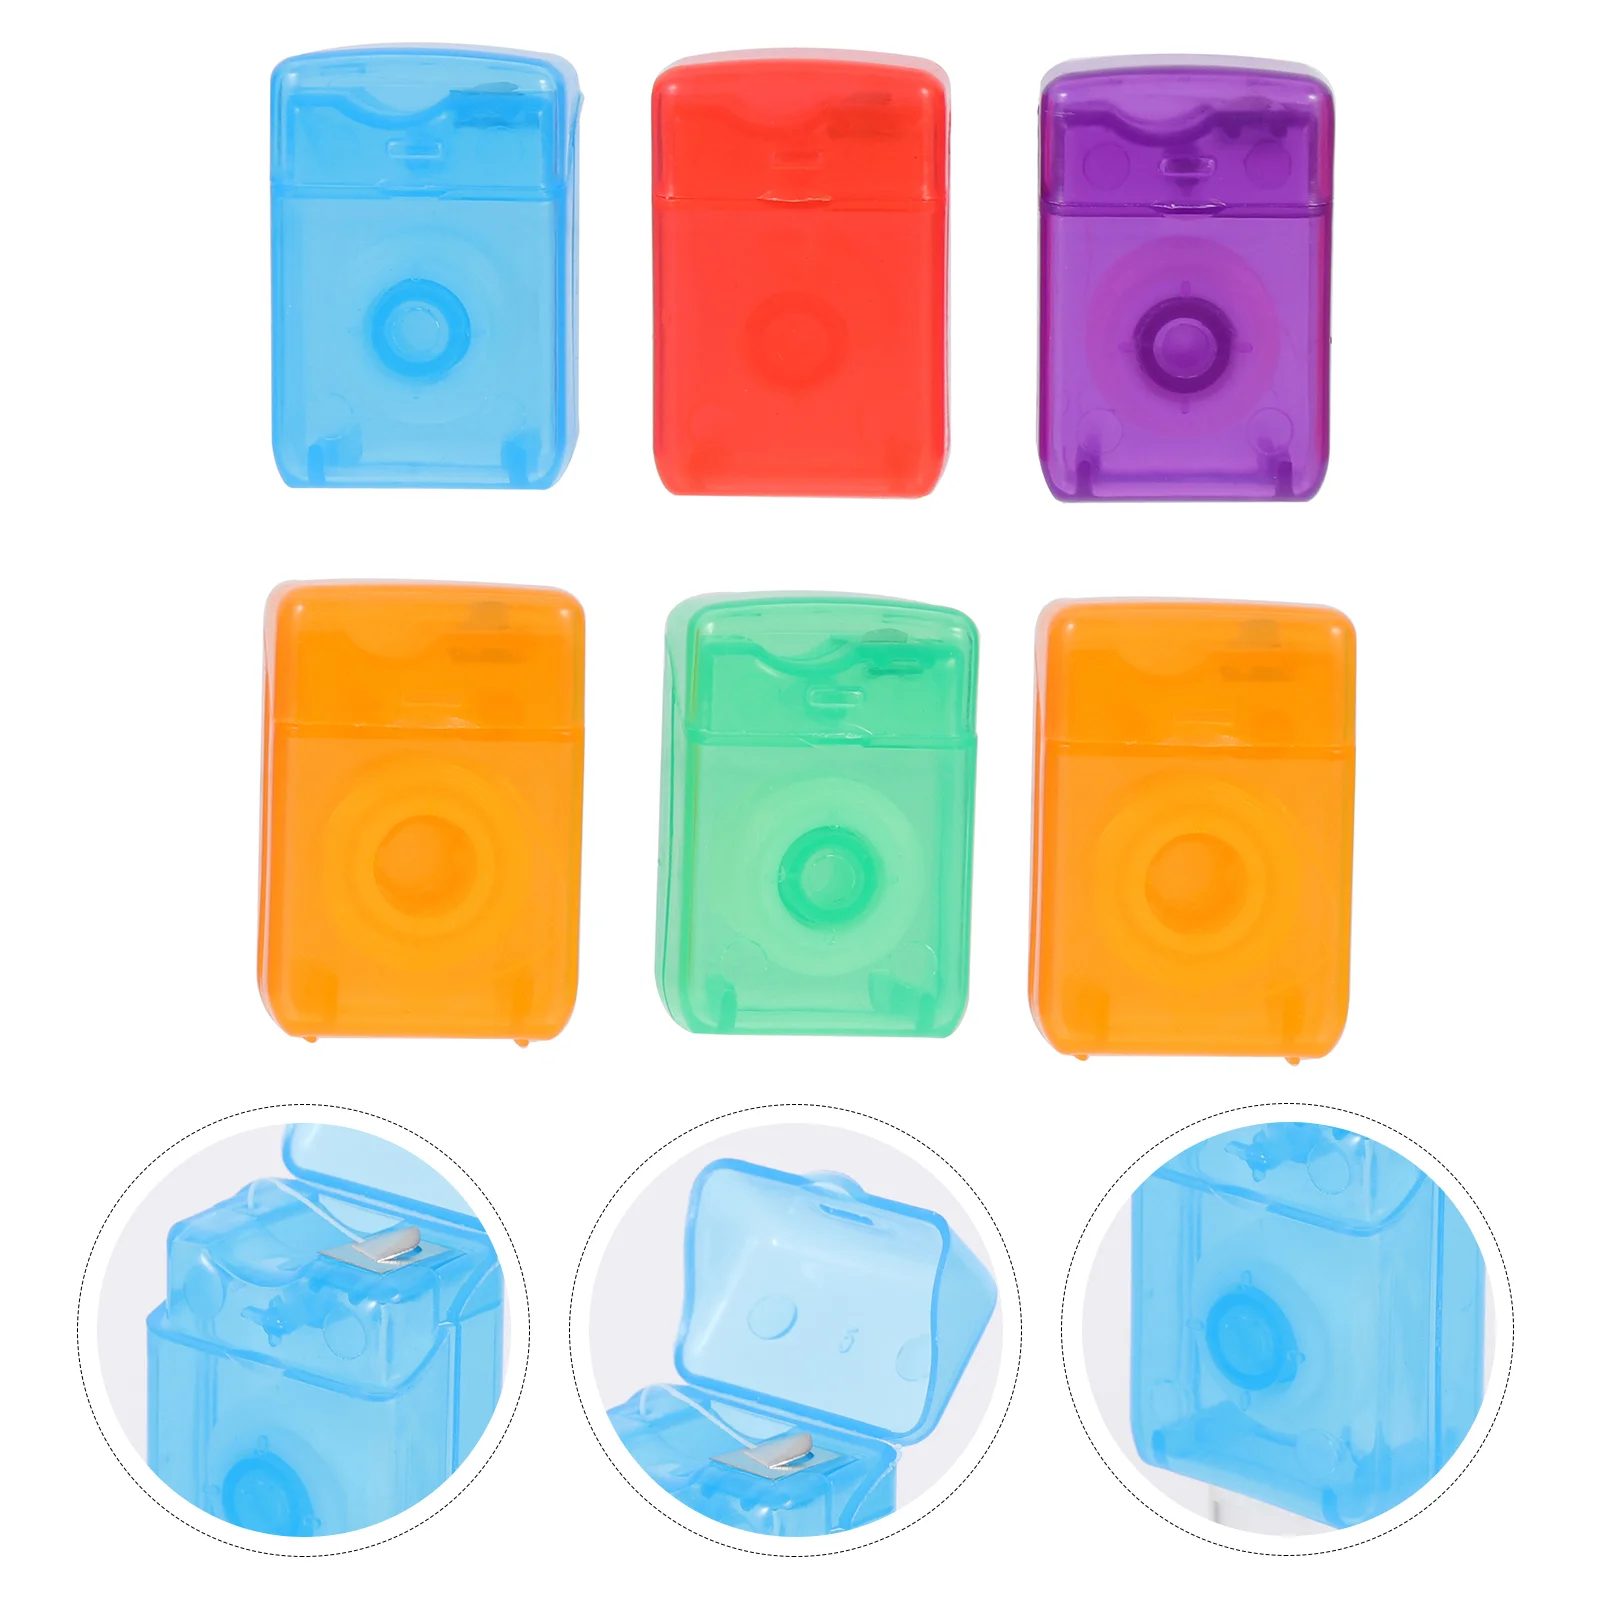 

Floss Teethpicks Kidsflossers Pick Flossing Holder Cleaning Care Toothpicks Oral Professional Braces Cleaner Sticks Compact